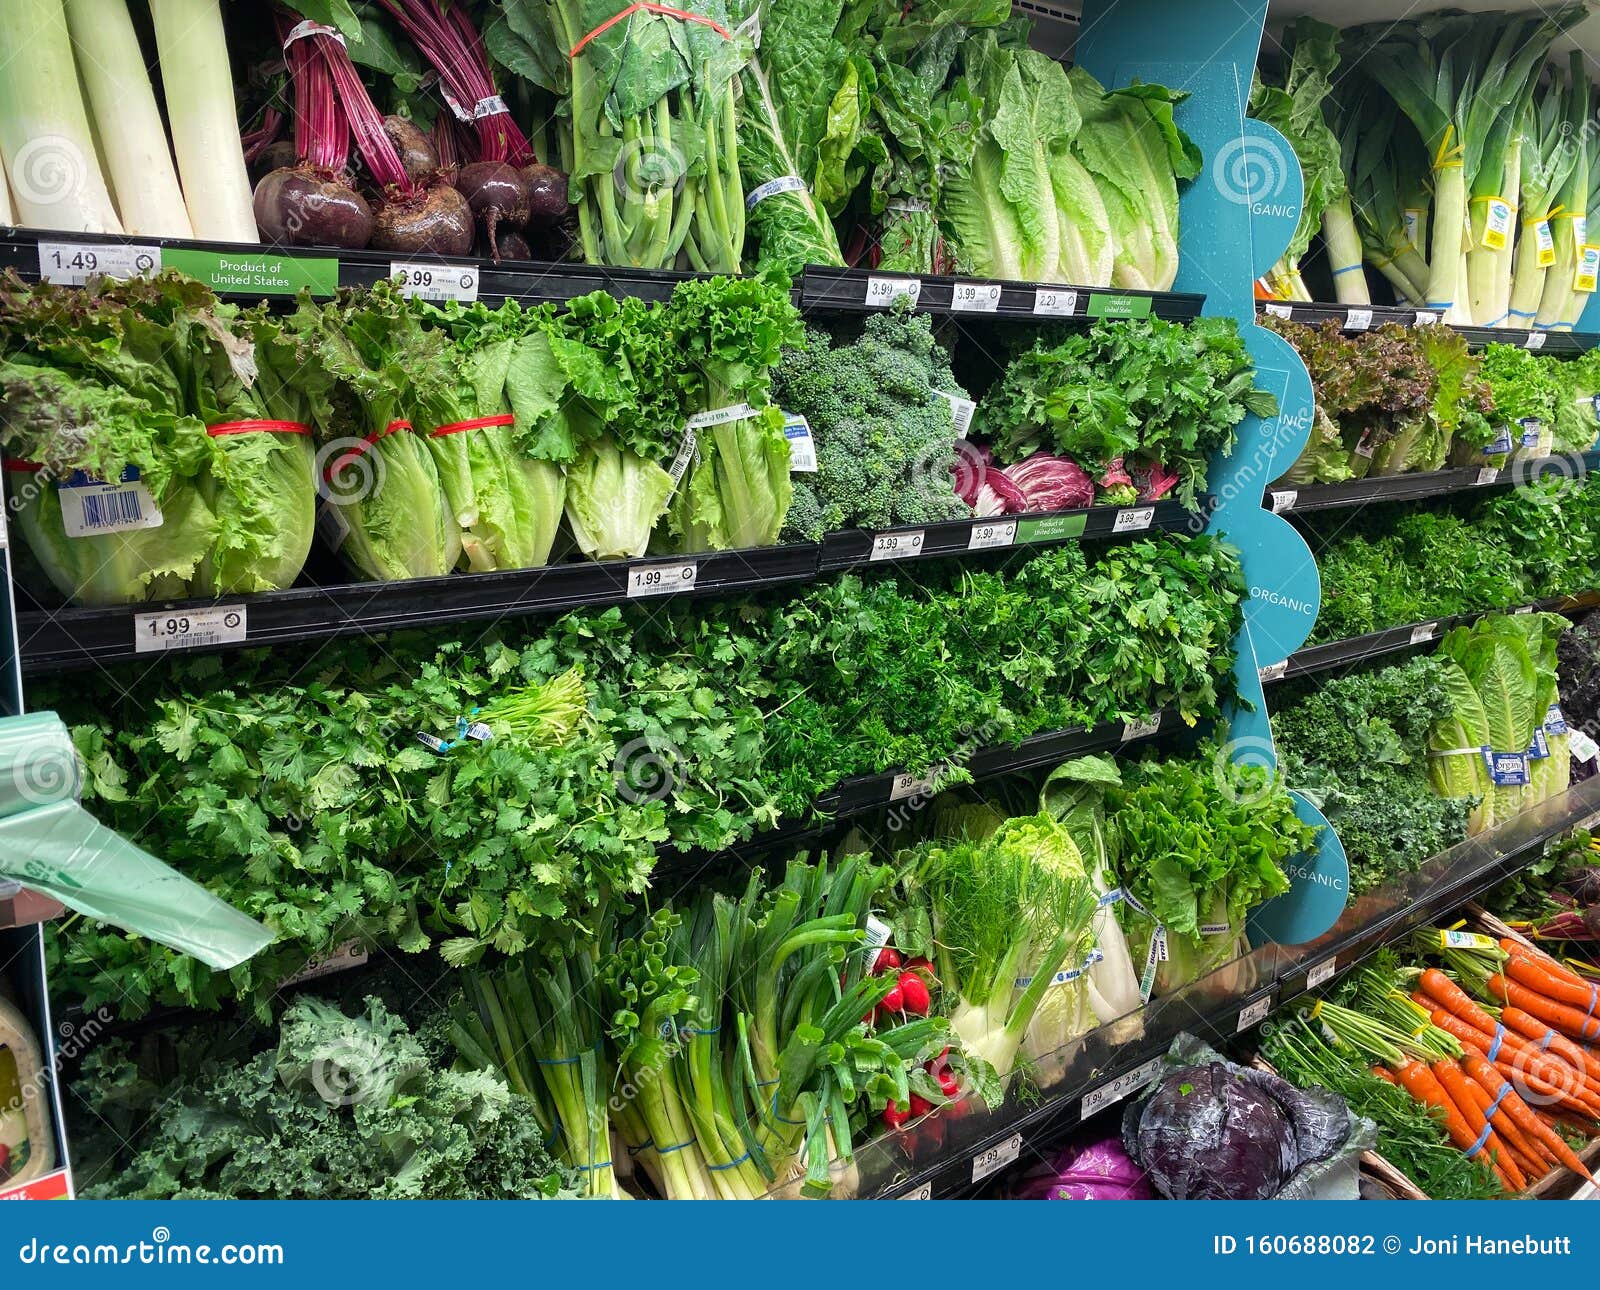 Grocery store produce aisle Royalty Free Vector Image